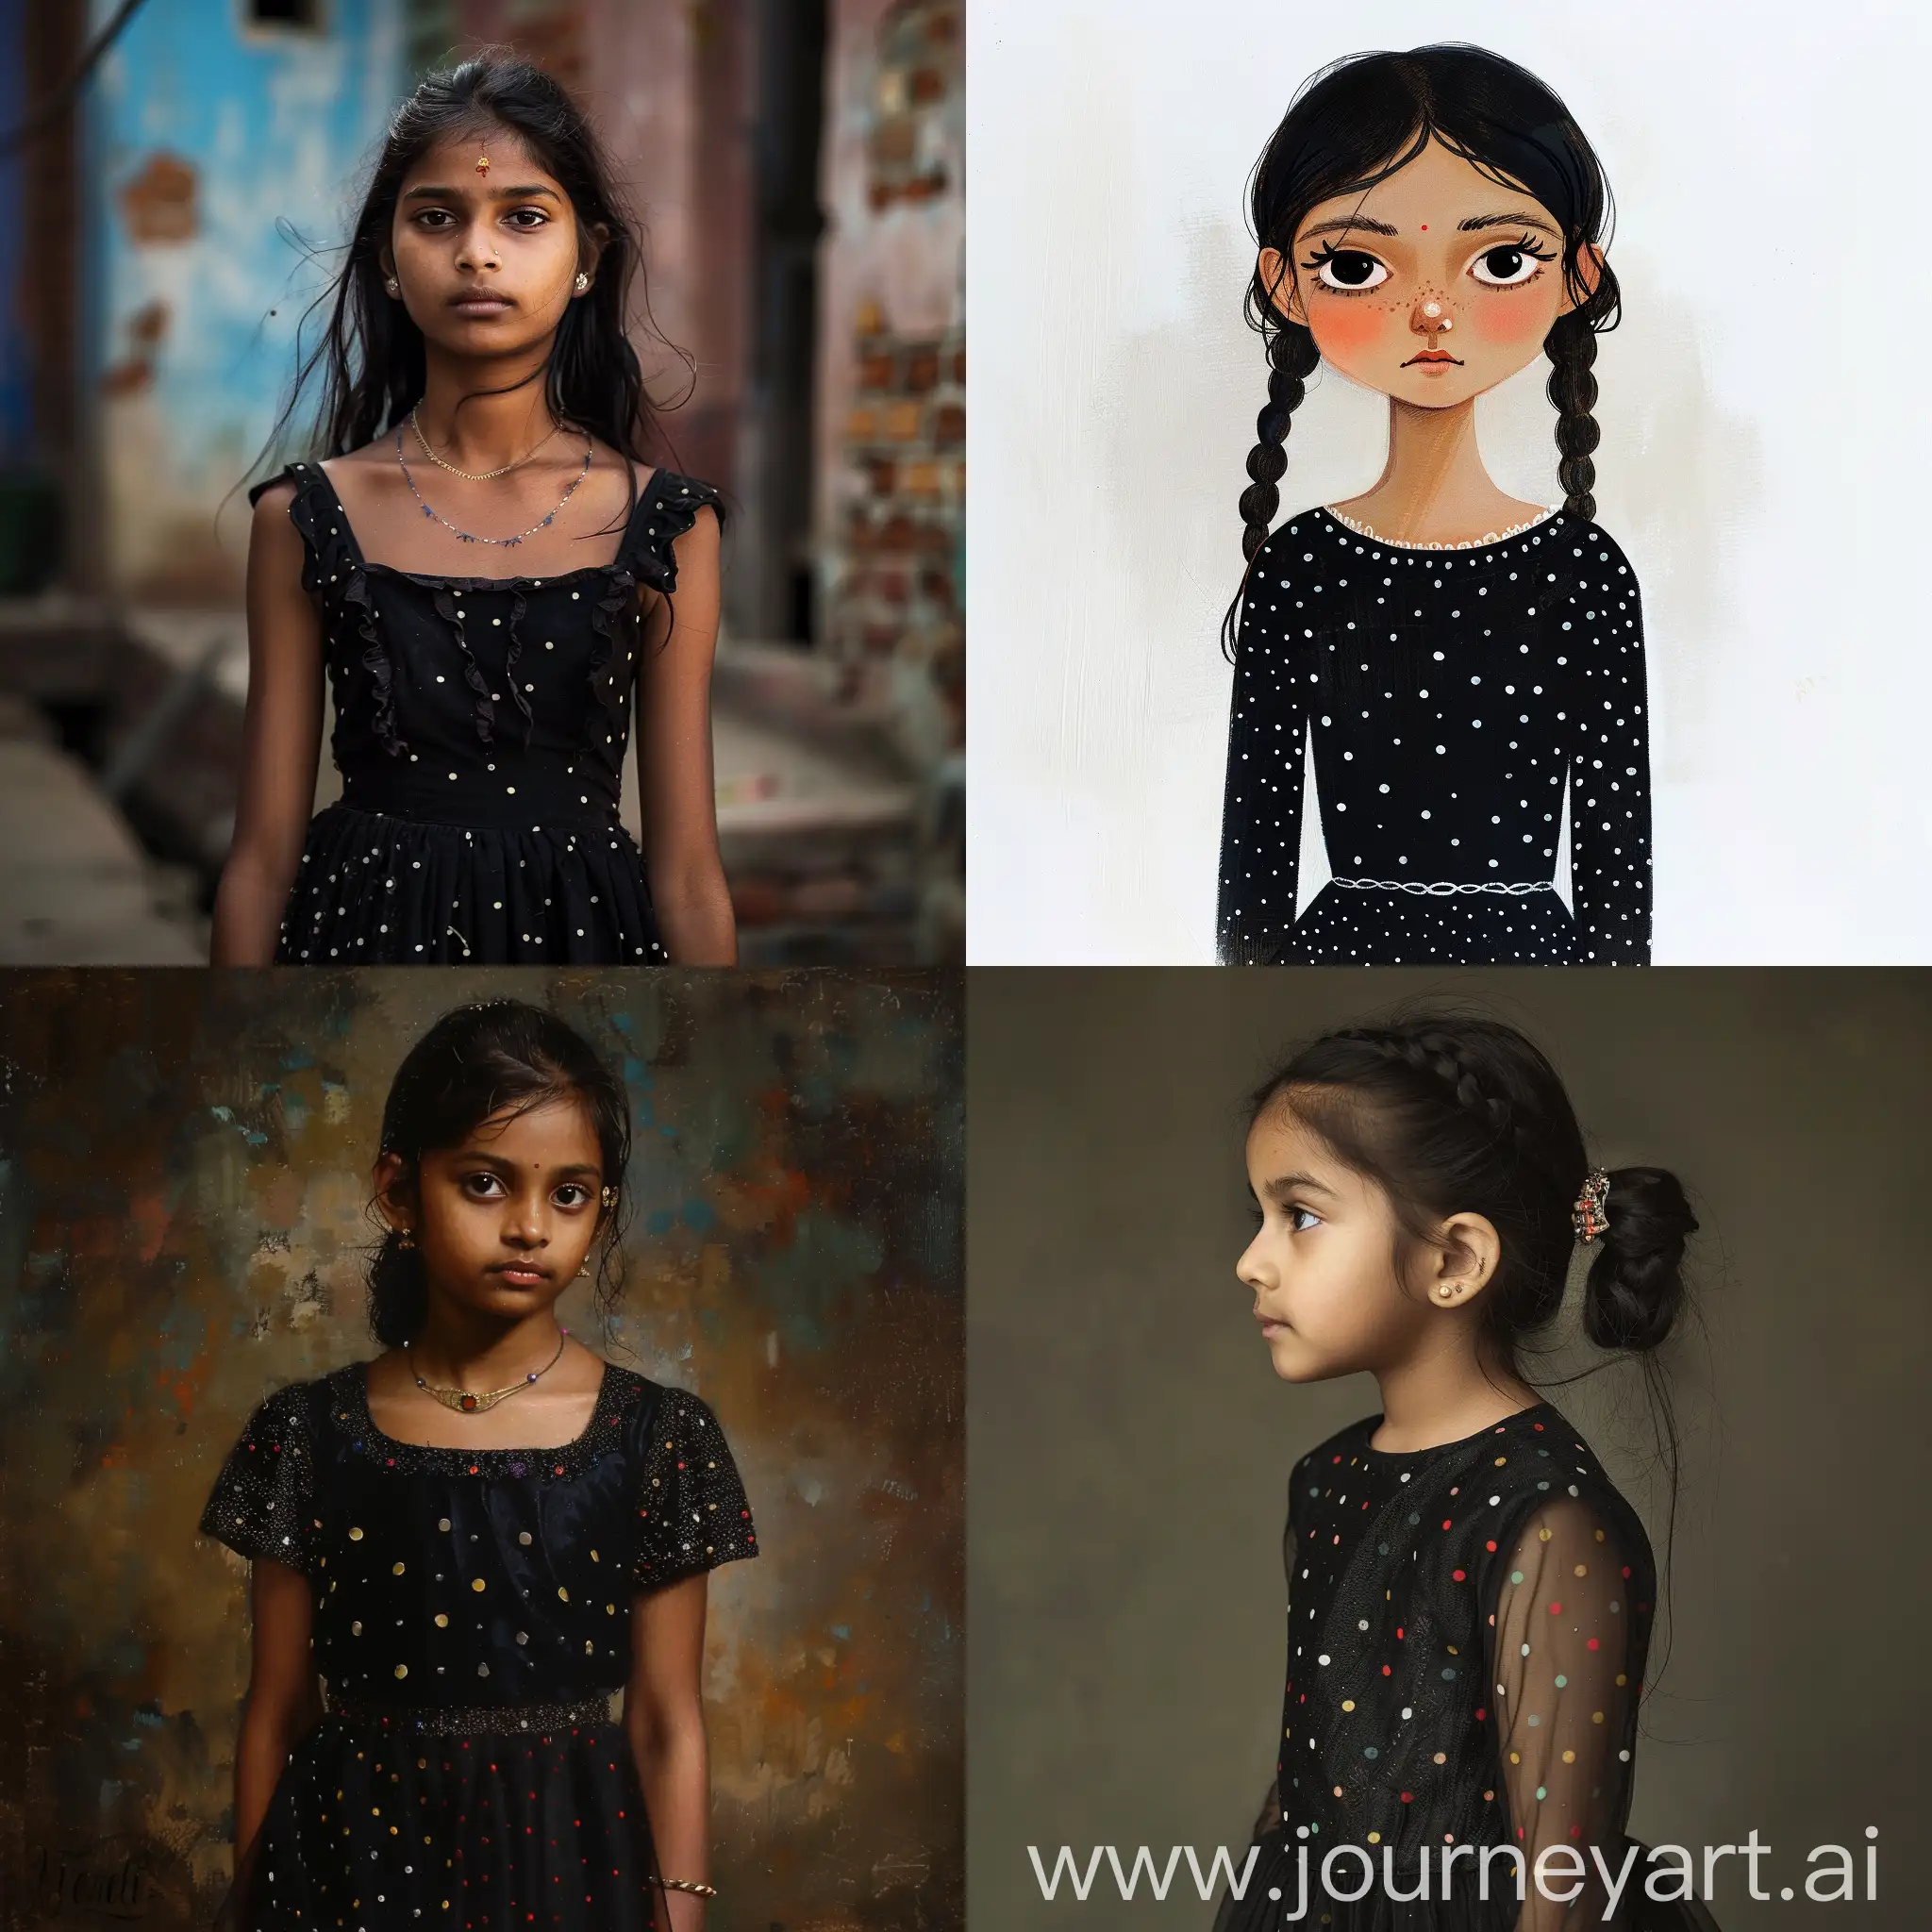 Indian girl in black dress with polka dots